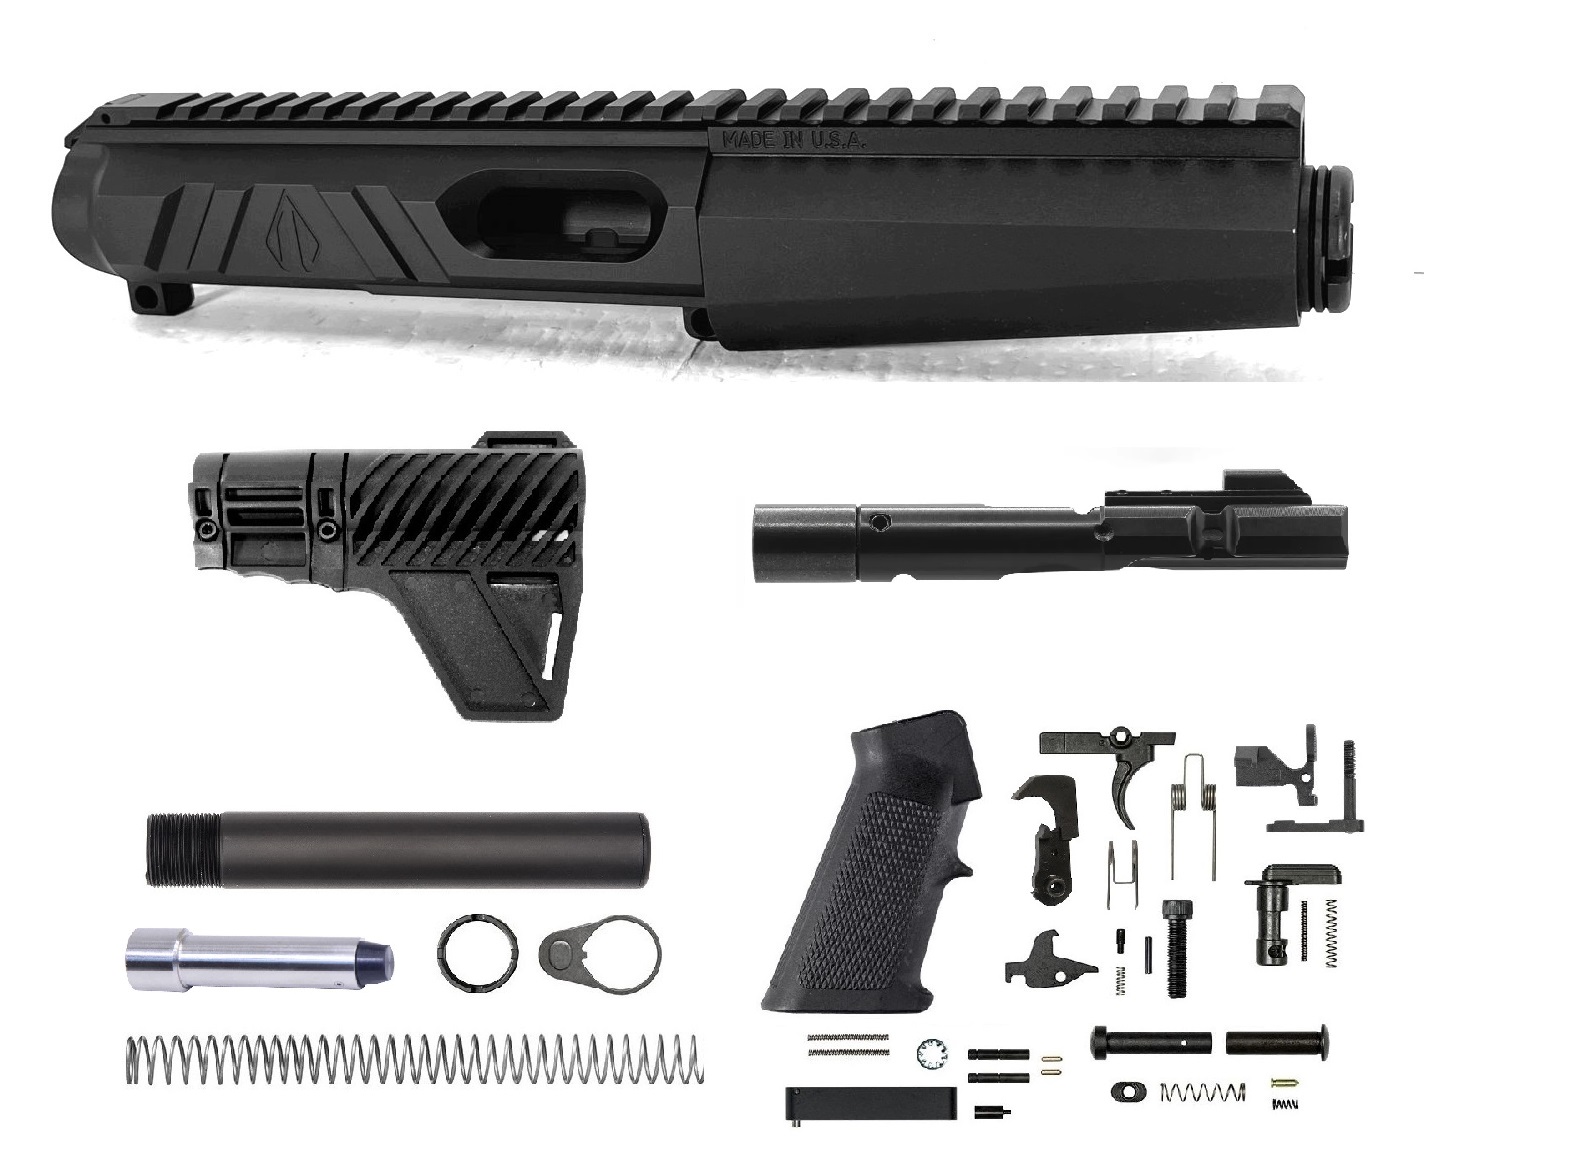 3 inch AR-15 AR-V MP5 Style NR Side Charging 45 ACP Melonite Upper w/Can Complete Kit